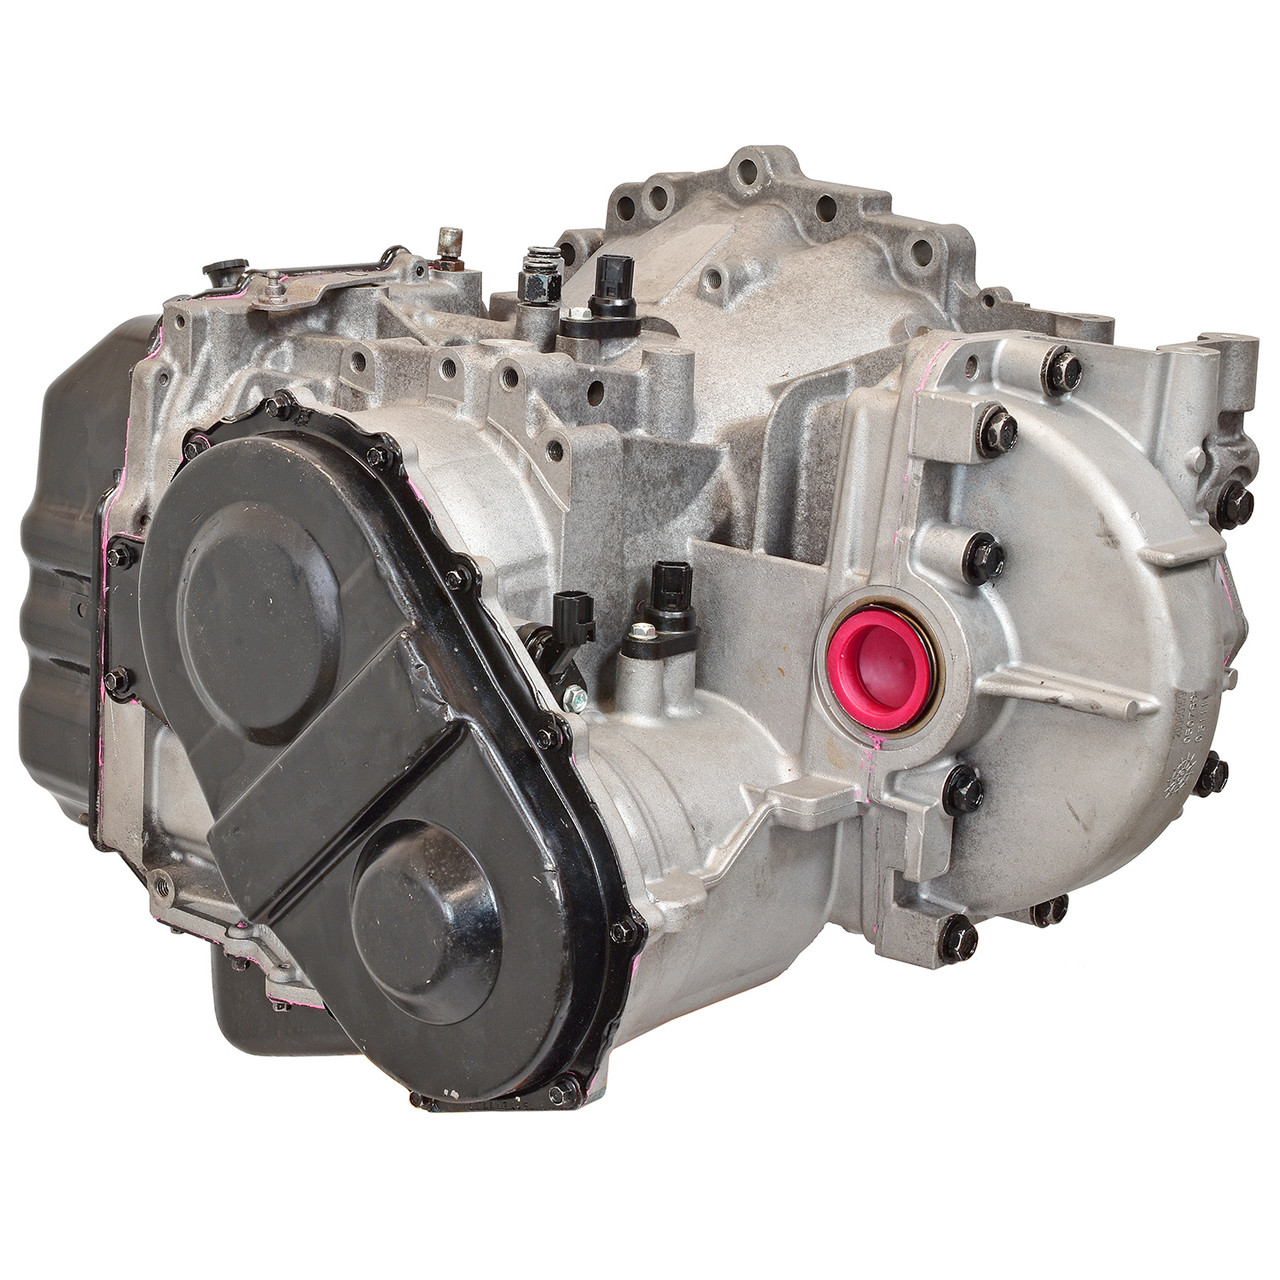 Remanufactured 62TE Transmissions